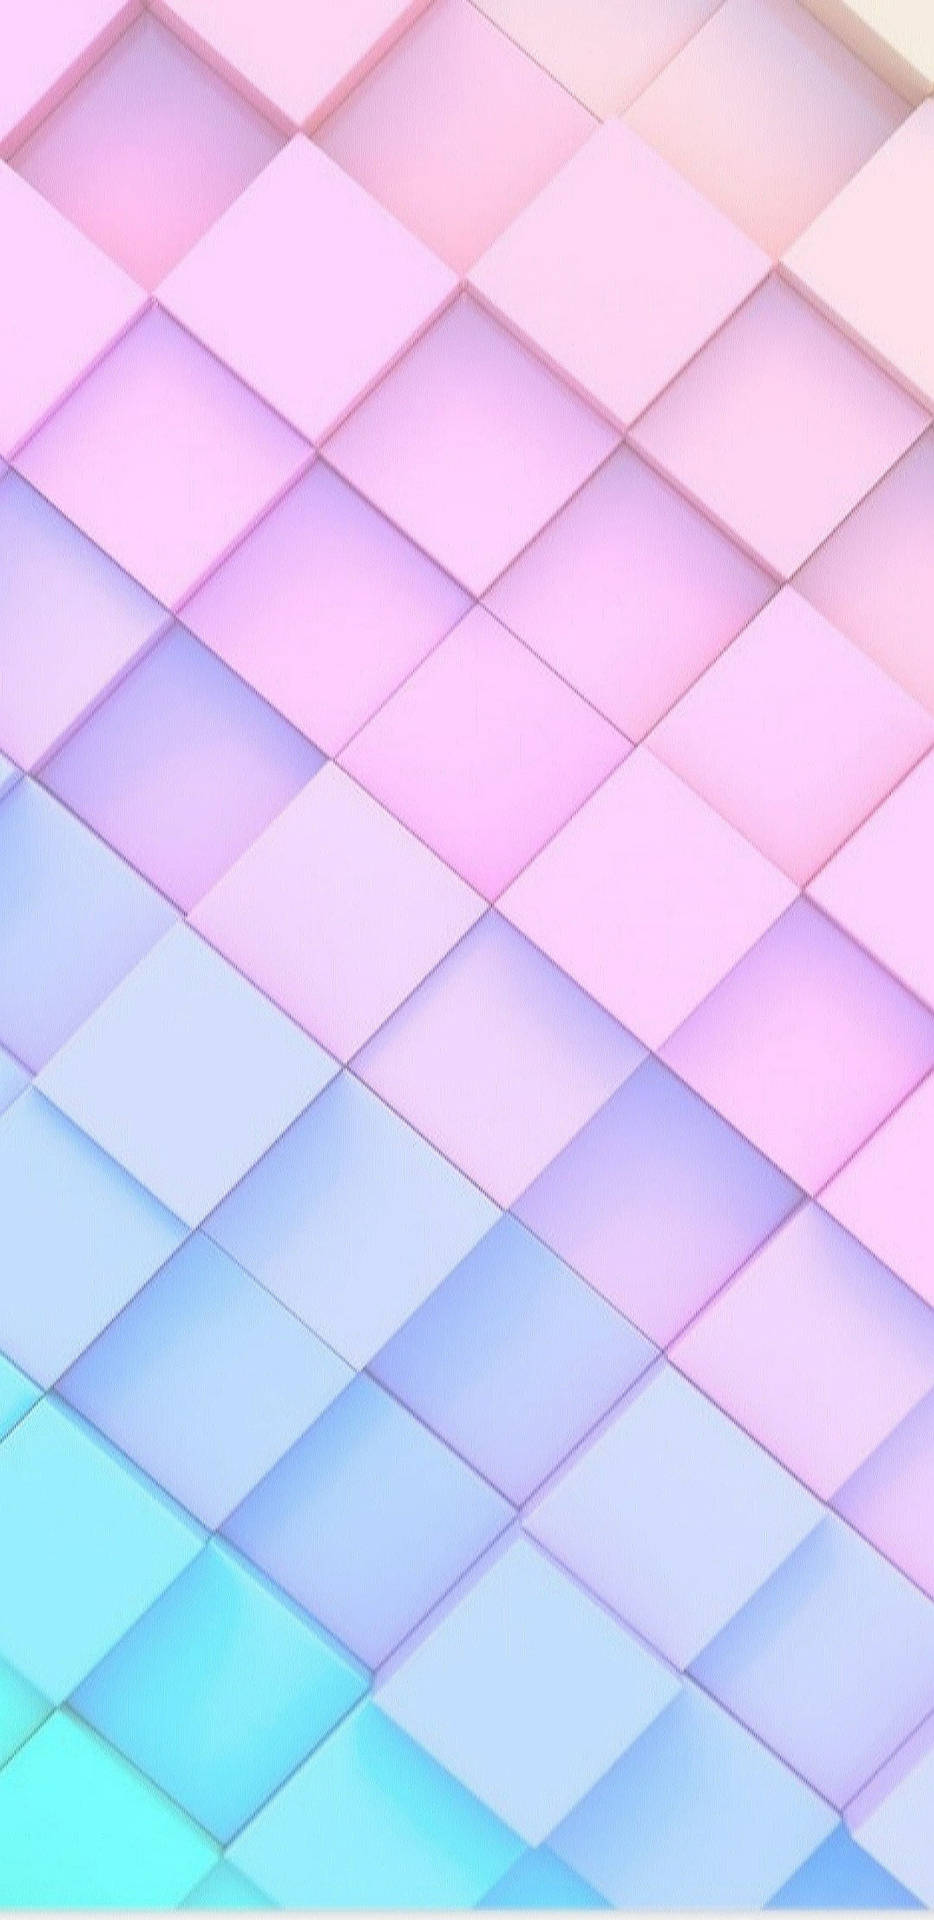 Diamond Weave In Cute Pastel Colors Background